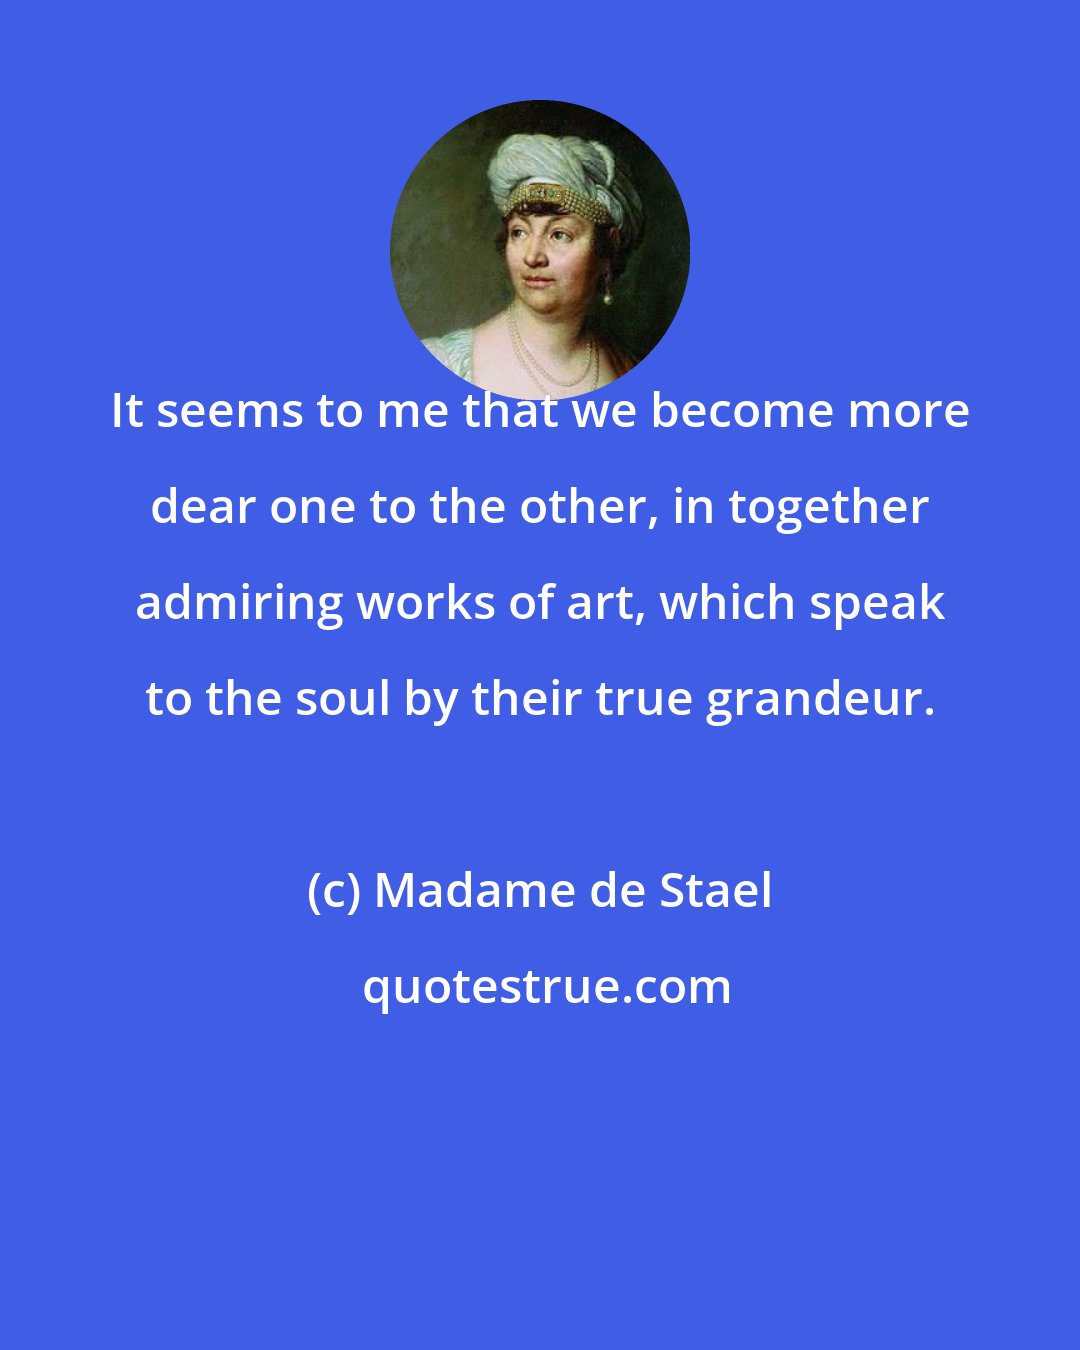 Madame de Stael: It seems to me that we become more dear one to the other, in together admiring works of art, which speak to the soul by their true grandeur.